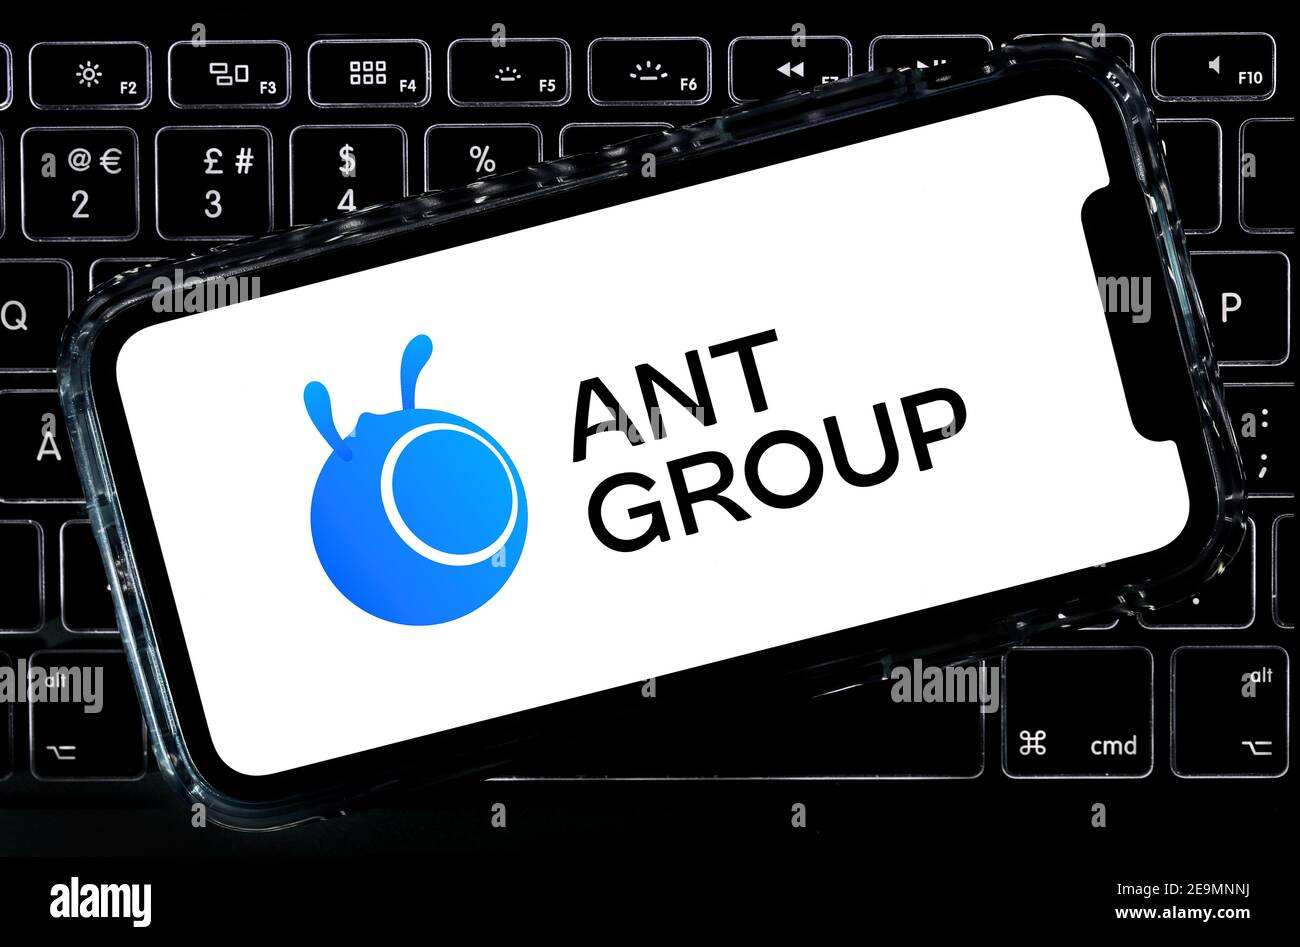 Ant Group displayed on a mobile phone (editorial use only) Stock Photo